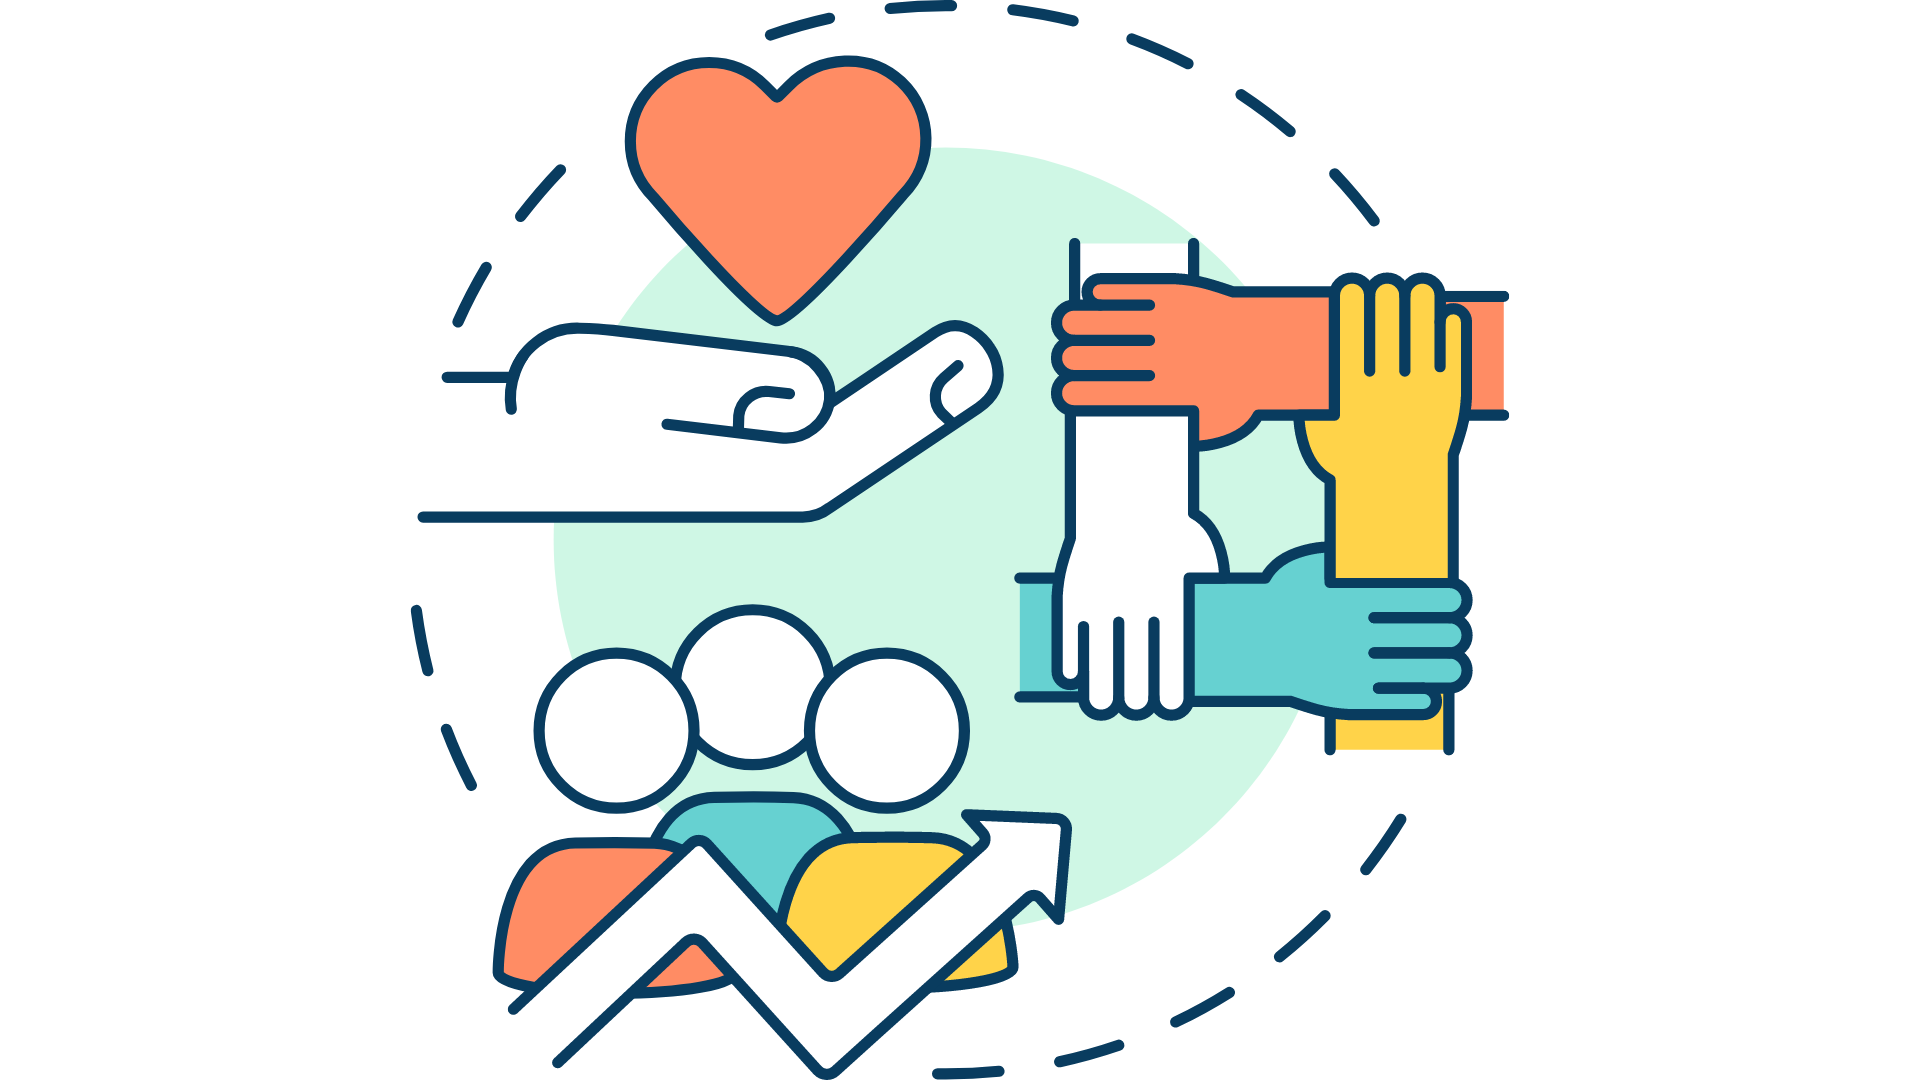 hand with floating heart above, 3 hands clasped at the wrists to create a square, three people standing together with an upward arrow over them